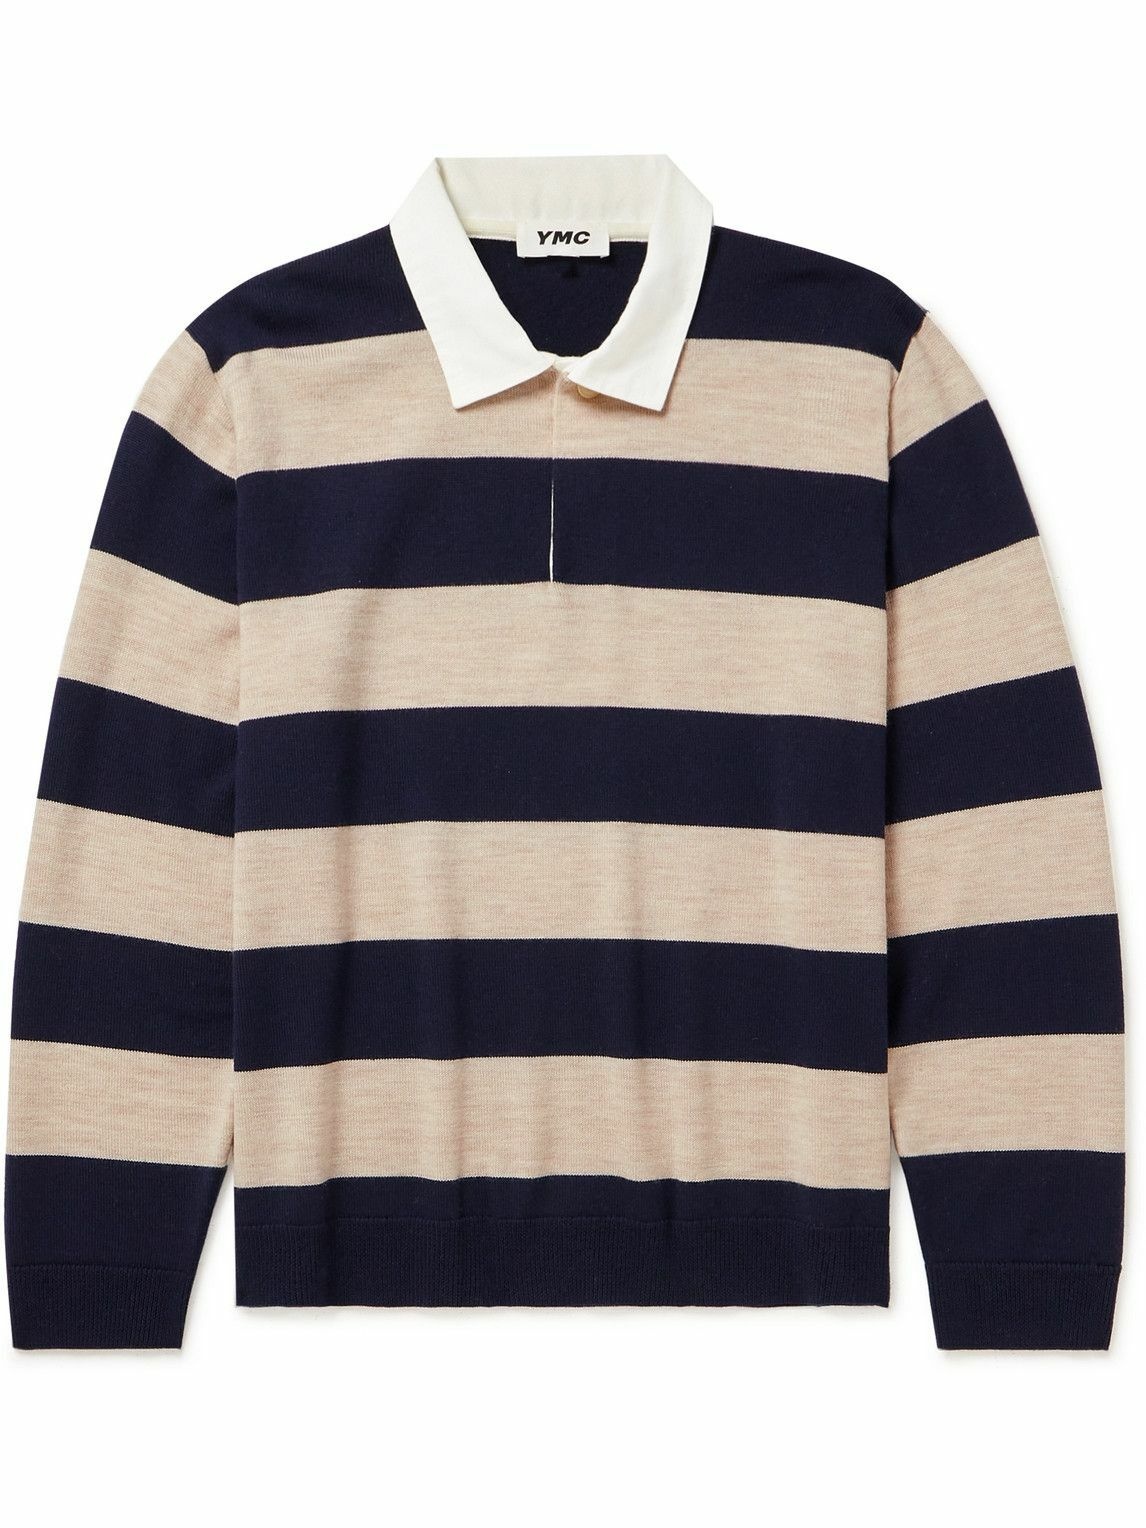 YMC - Up and Under Poplin-Trimmed Striped Merino Wool Rugby Shirt ...